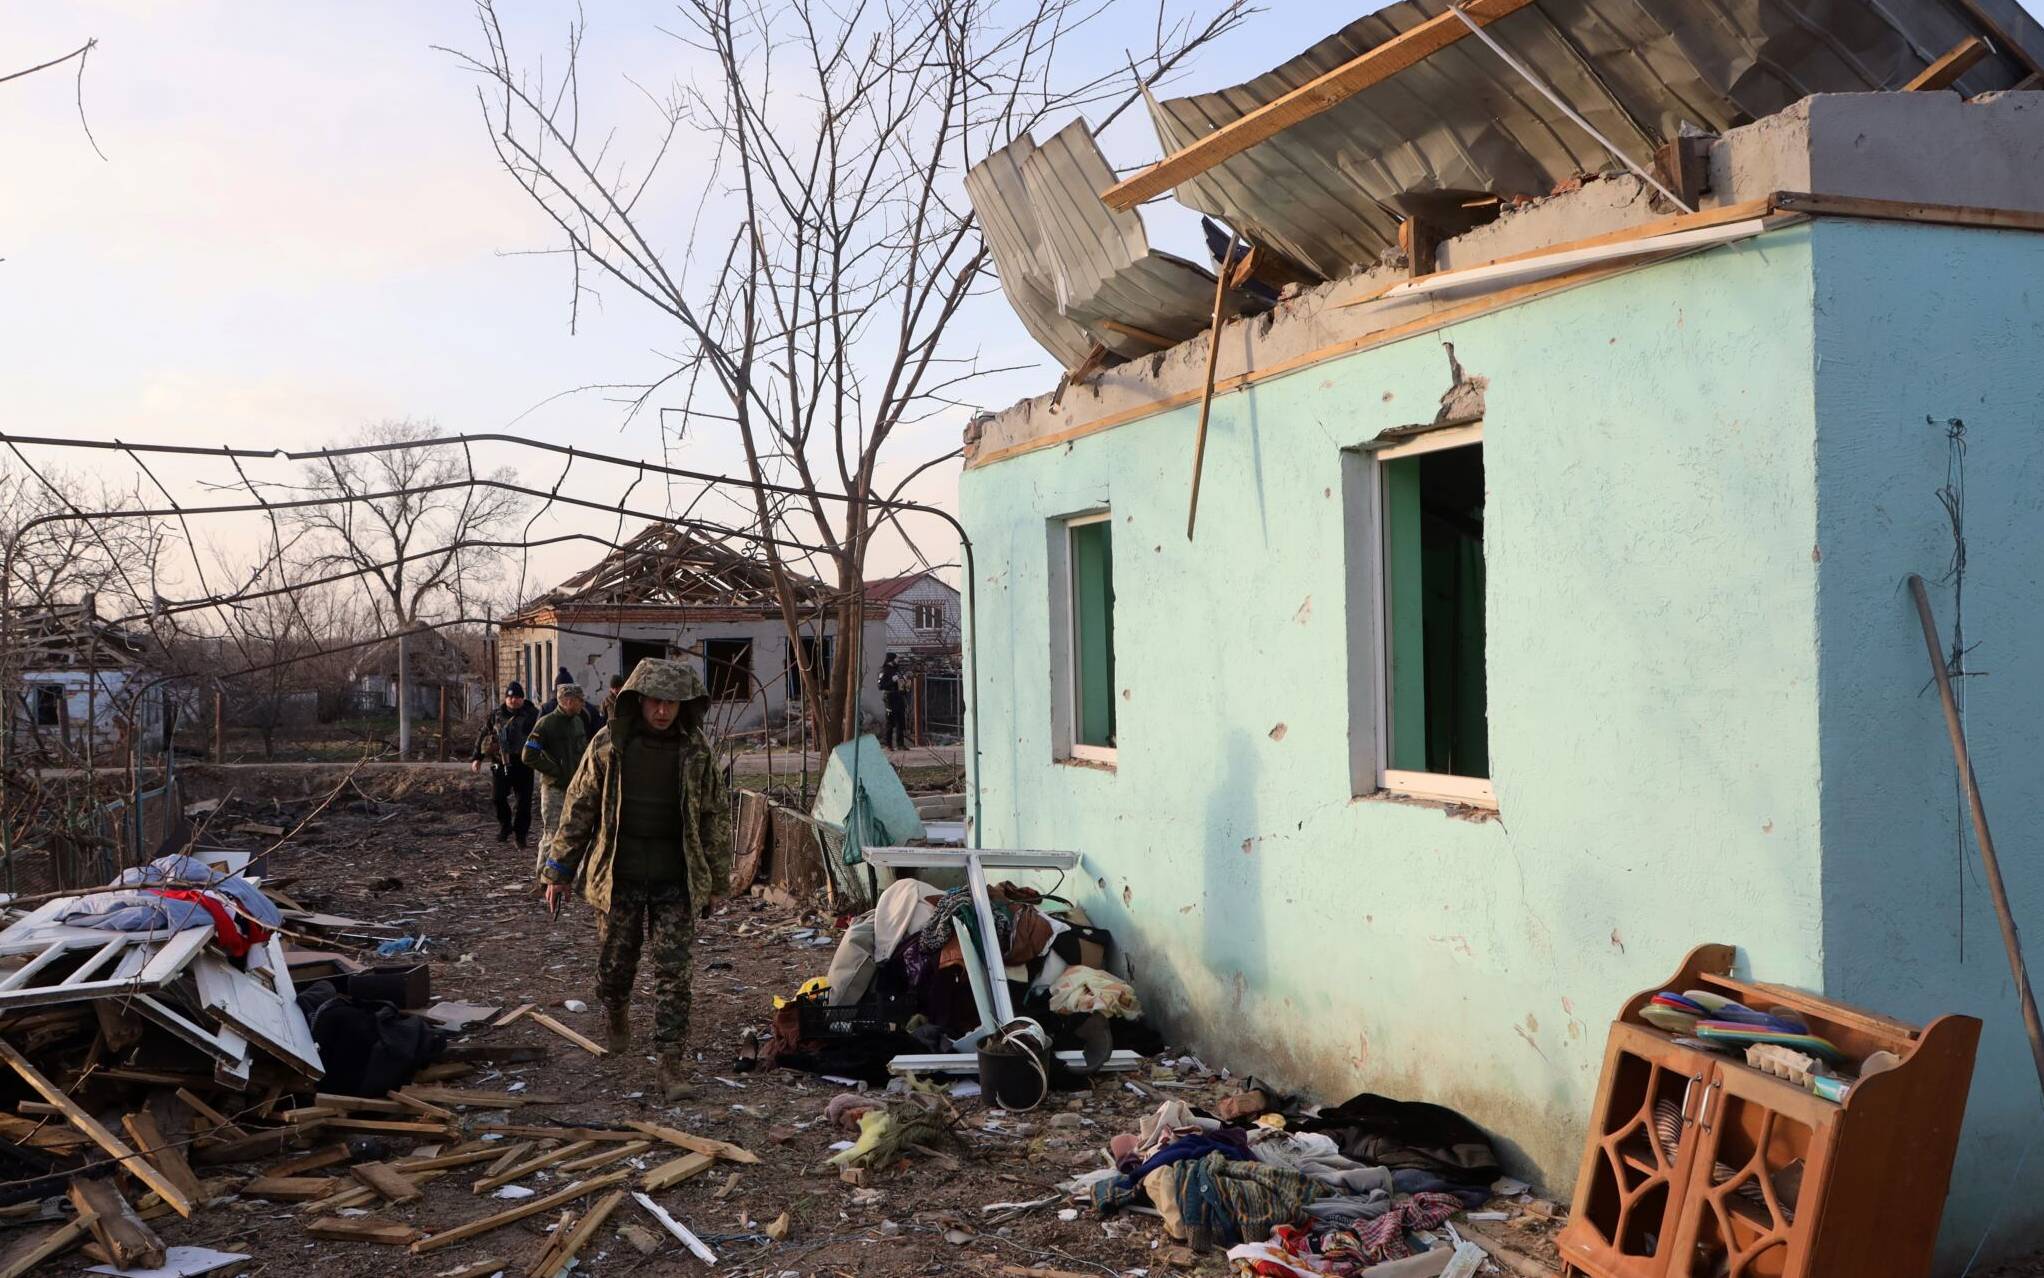 Ukrainian servicemen inspect a house which was destroyed by Russian forces in the village of Bachtanka near Mykolaiv, a key city on the road to Odessa on March 27, 2022. - In the southern town of Mykolaiv, under heavy assault for weeks, the bombardments appeared to be easing. (Photo by Oleksandr GIMANOV / AFP)